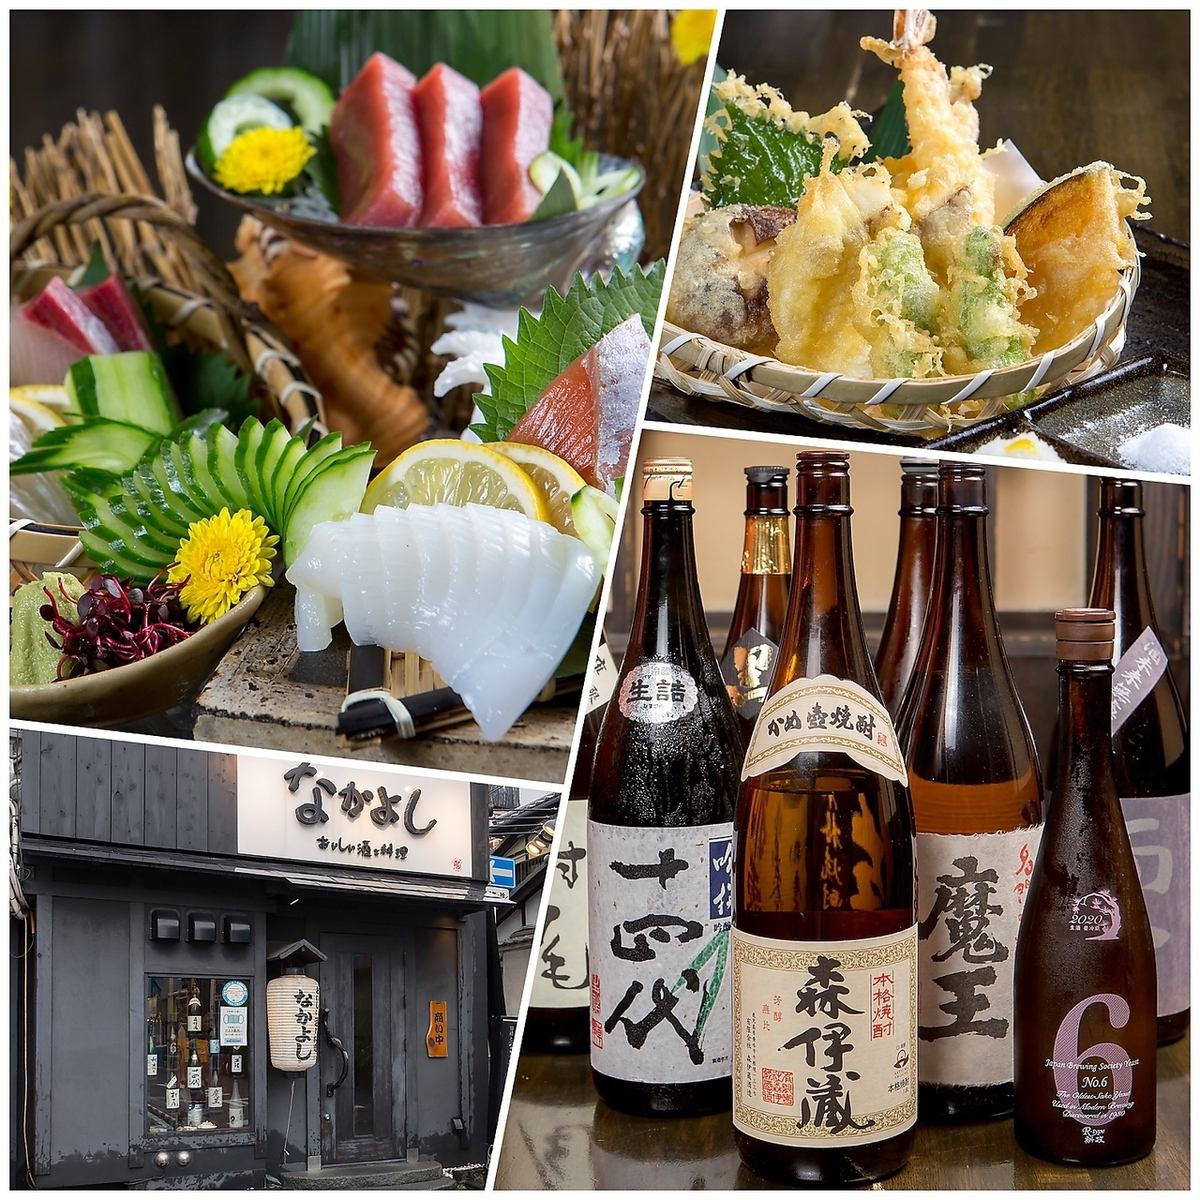 Delicious sake and food! A restaurant that boasts warm hospitality ◎